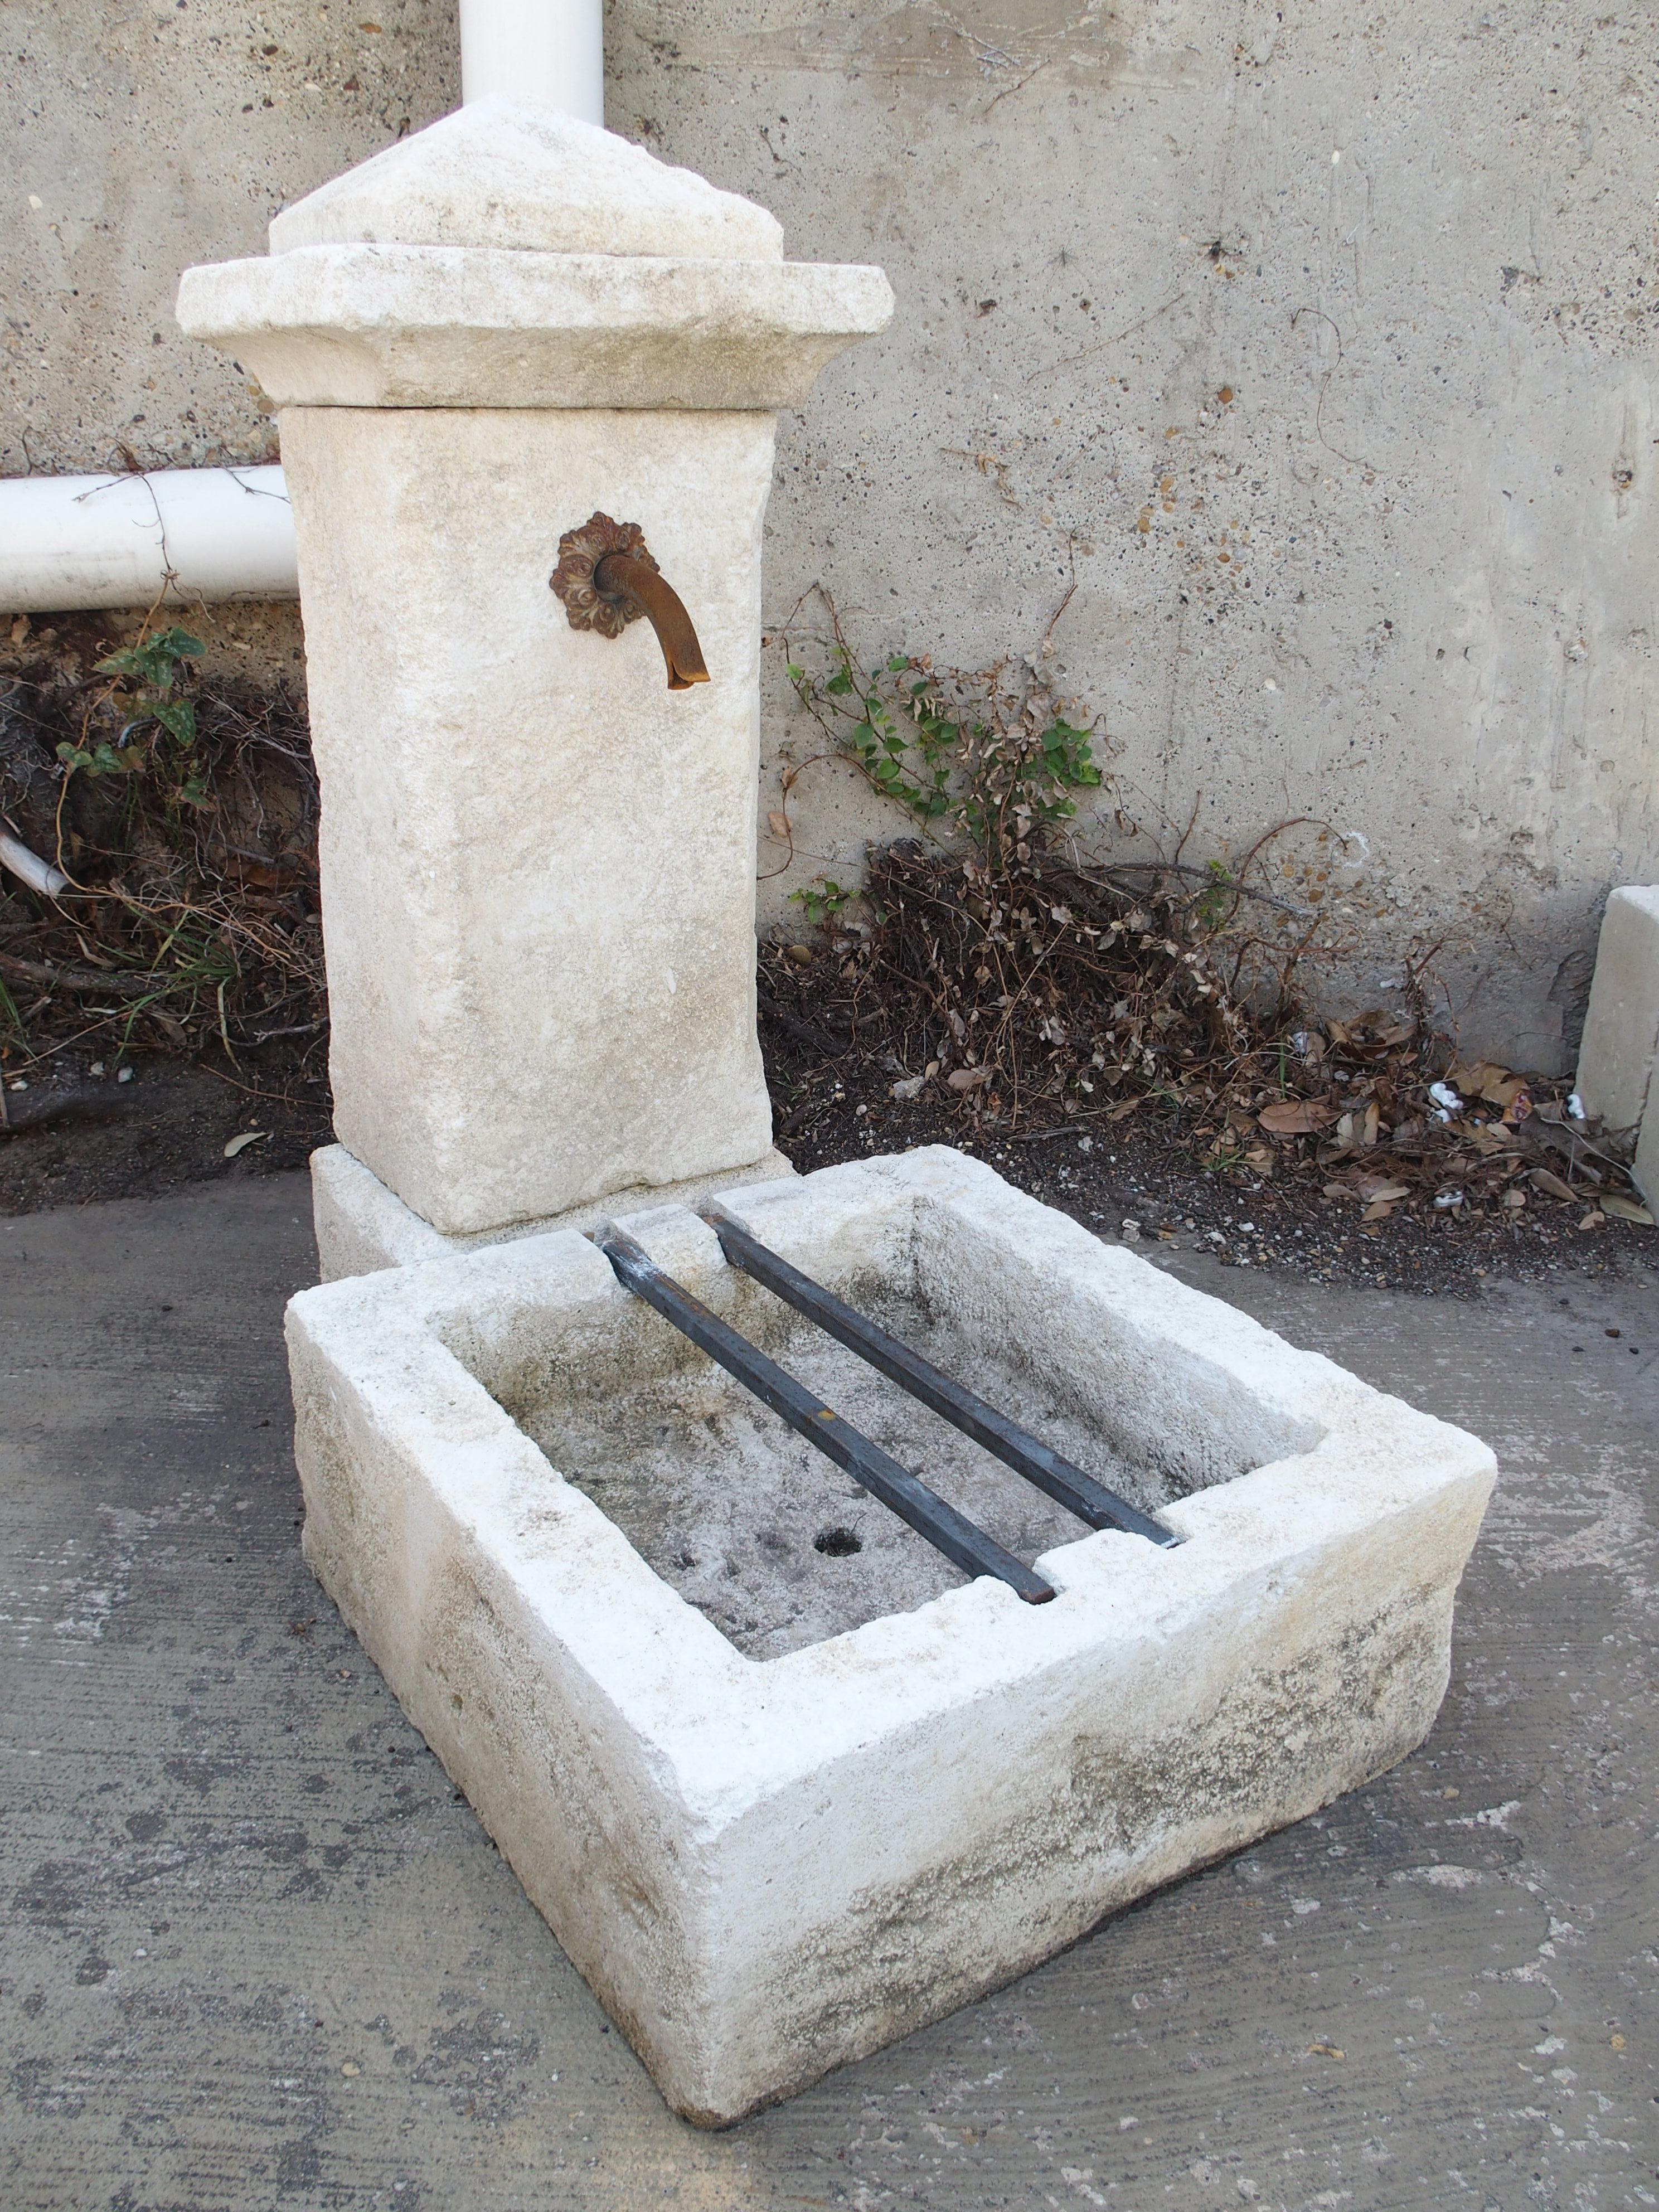 Consisting of five pieces of Estaillade limestone, this small single-pillar fountain was hand-carved by a stone mason in Provence, France. The freestanding fountain is quite versatile, as it could be positioned as a wall fountain or used as a